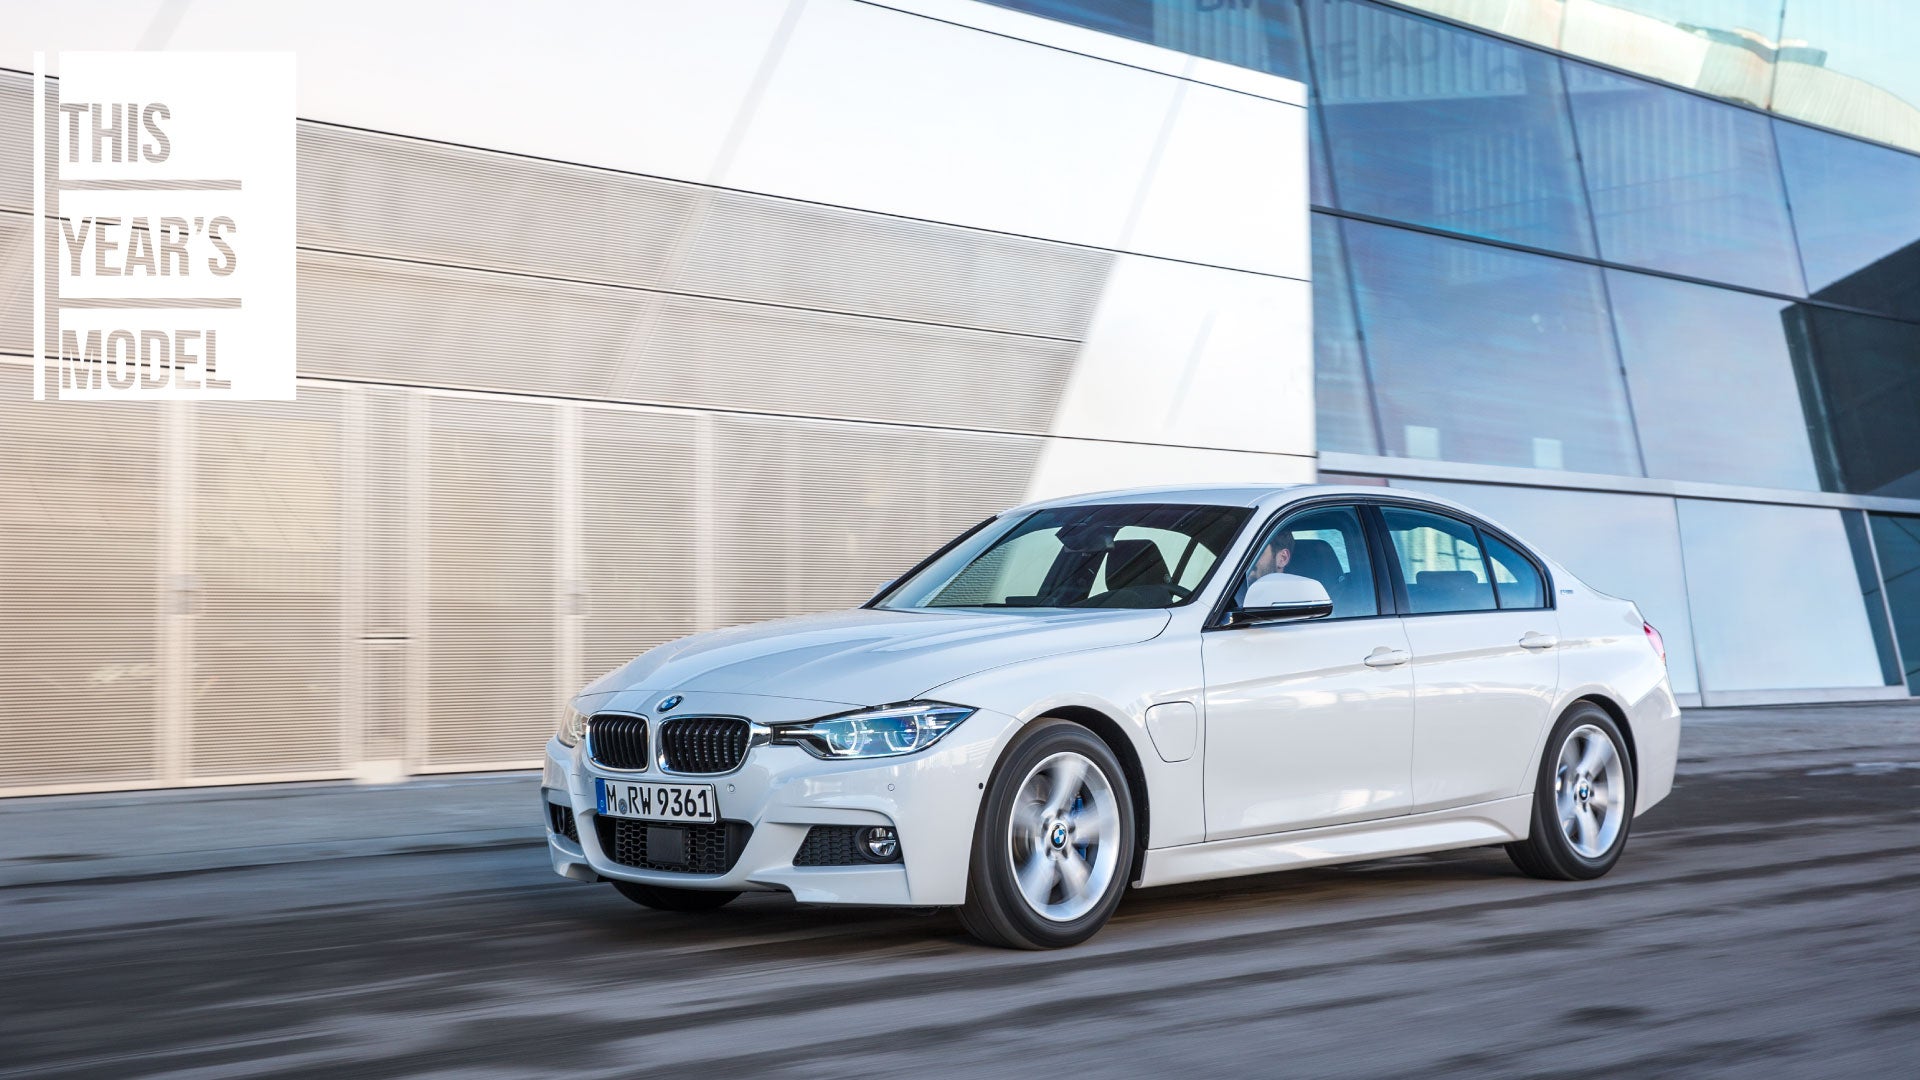 2018 BMW 330e i Performance Test Drive Review: A Plug-in Hybrid 3 Series, For Better and Worse